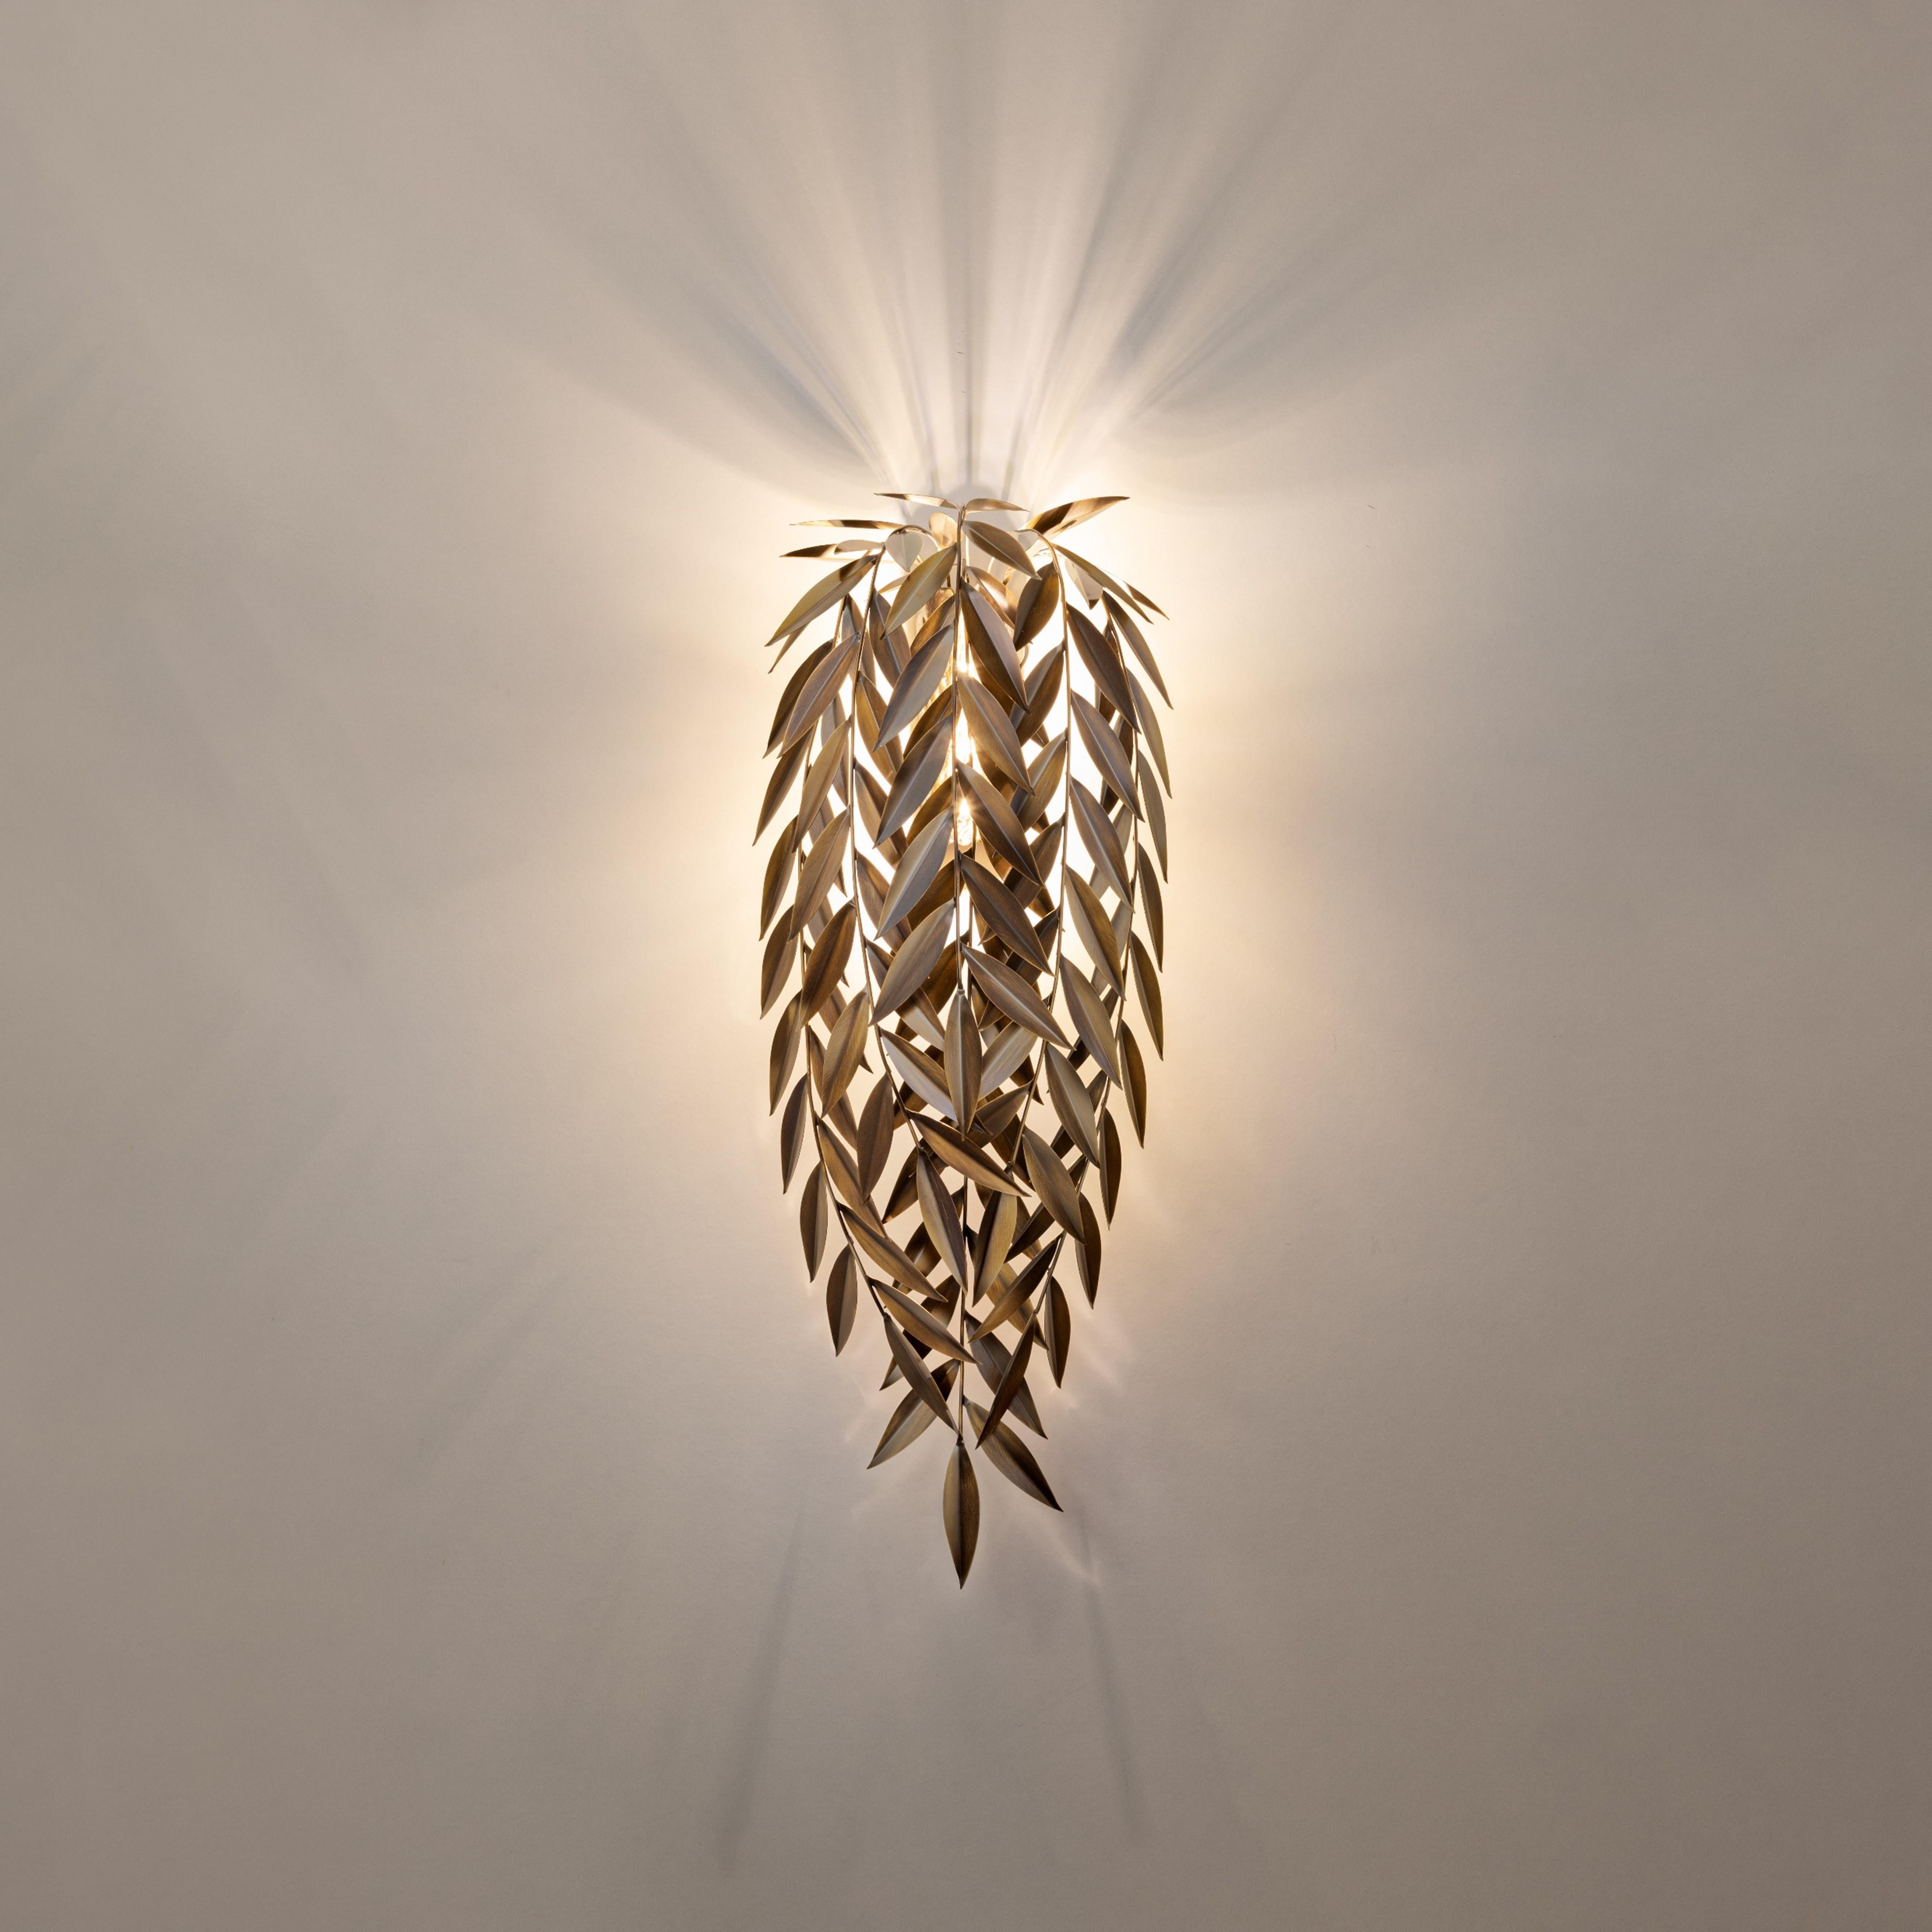 Azores Wall Lamp, Oxidized Brushed Brass, InsidherLand by Joana Santos Barbosa In New Condition For Sale In Maia, Porto